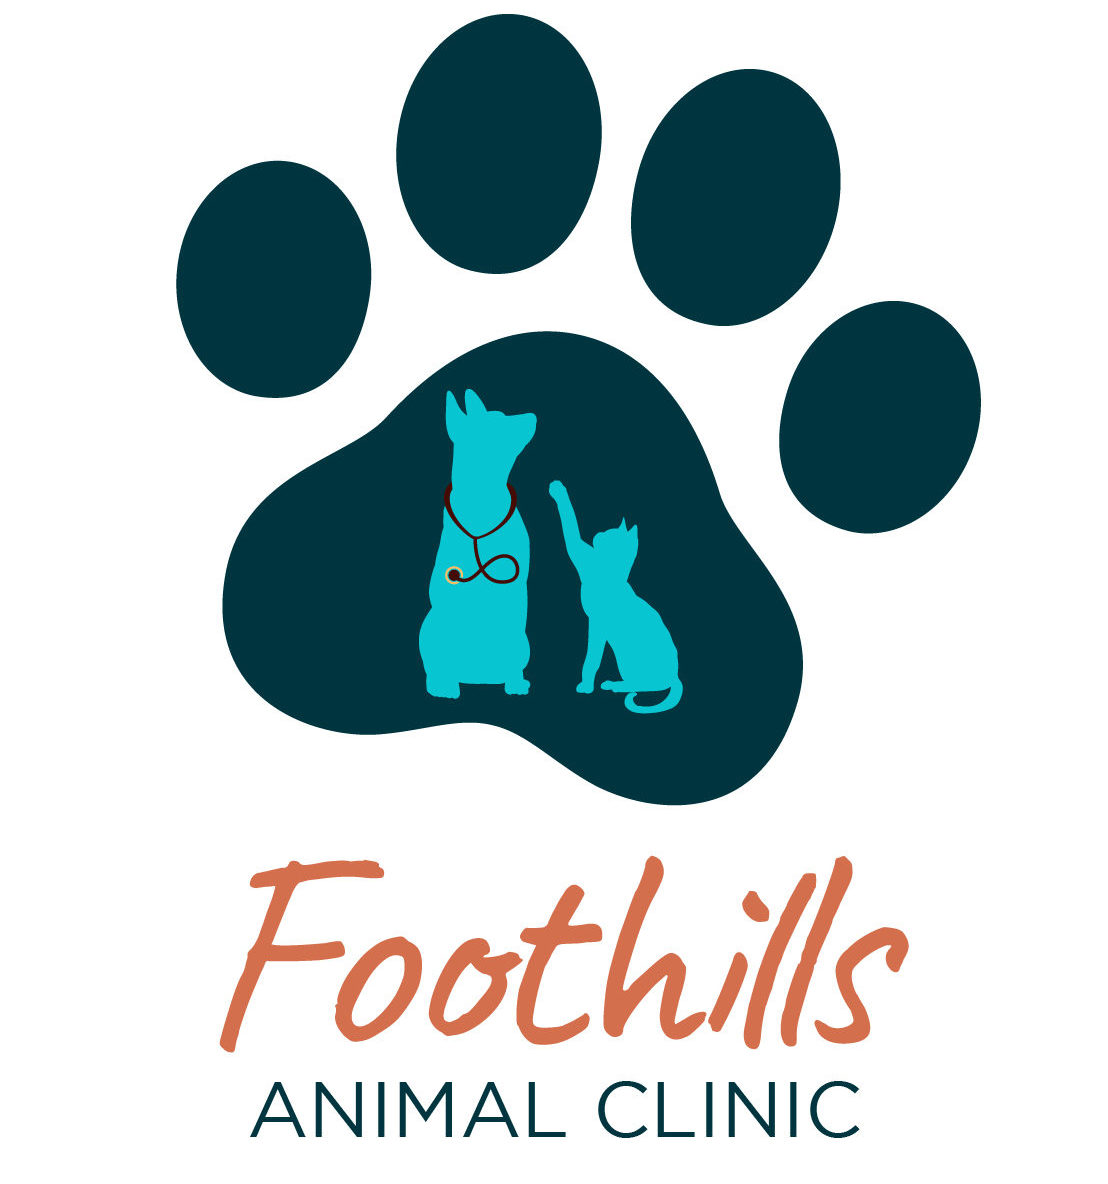 Foothills Animal Clinic